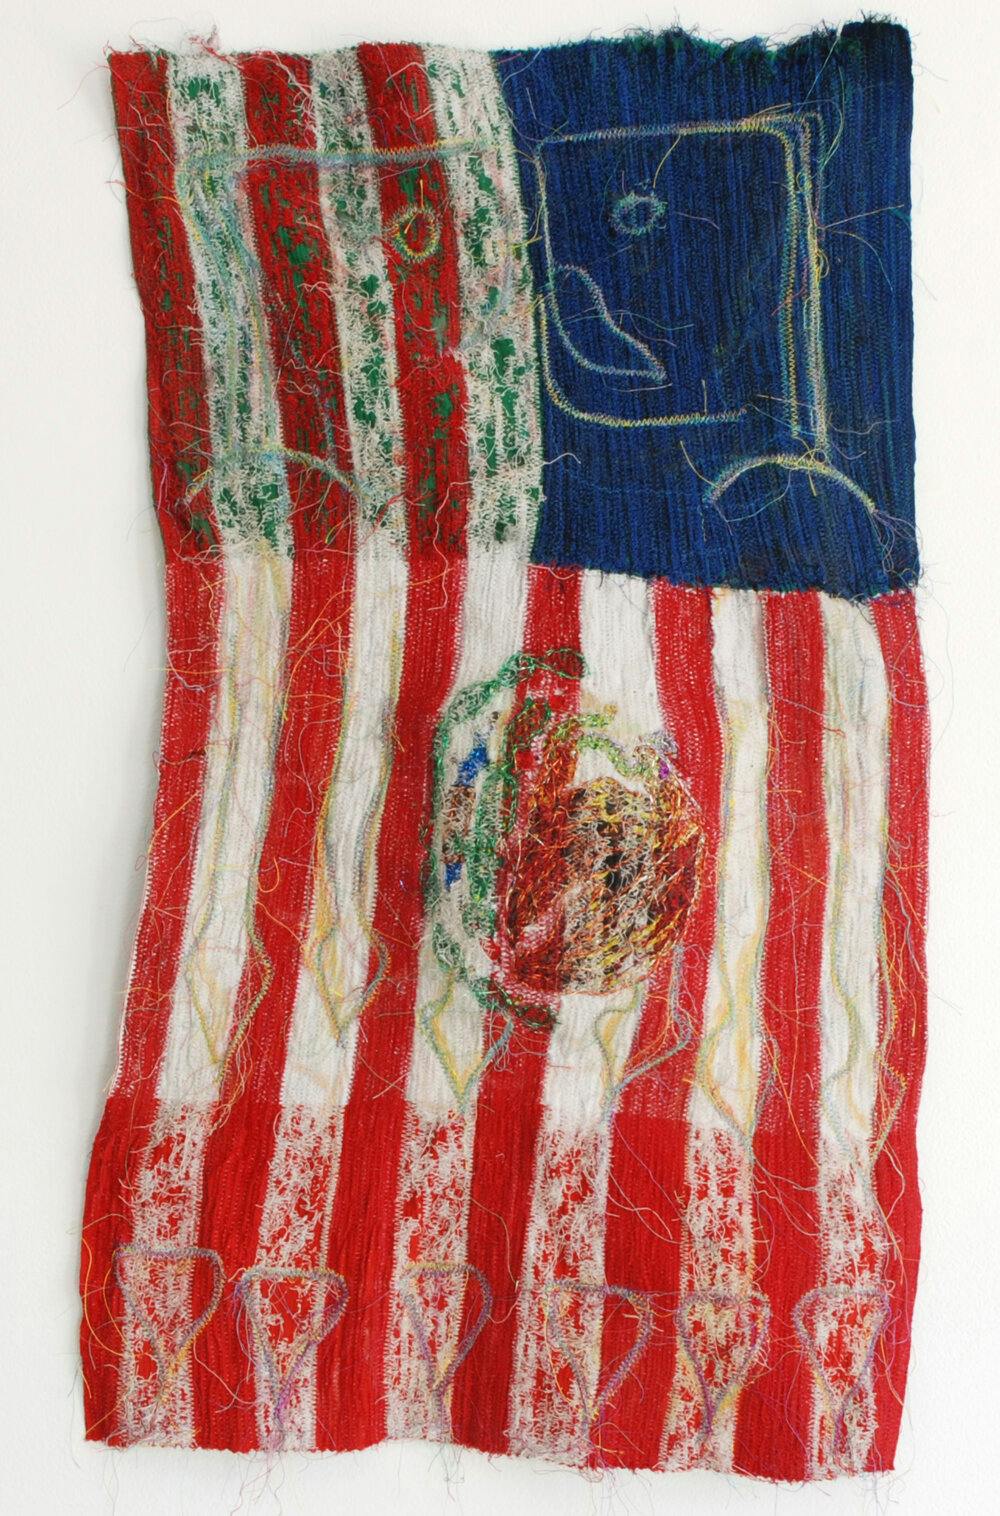 woven artwork reminscent of american flag with abstract shapes interspersed in the textile